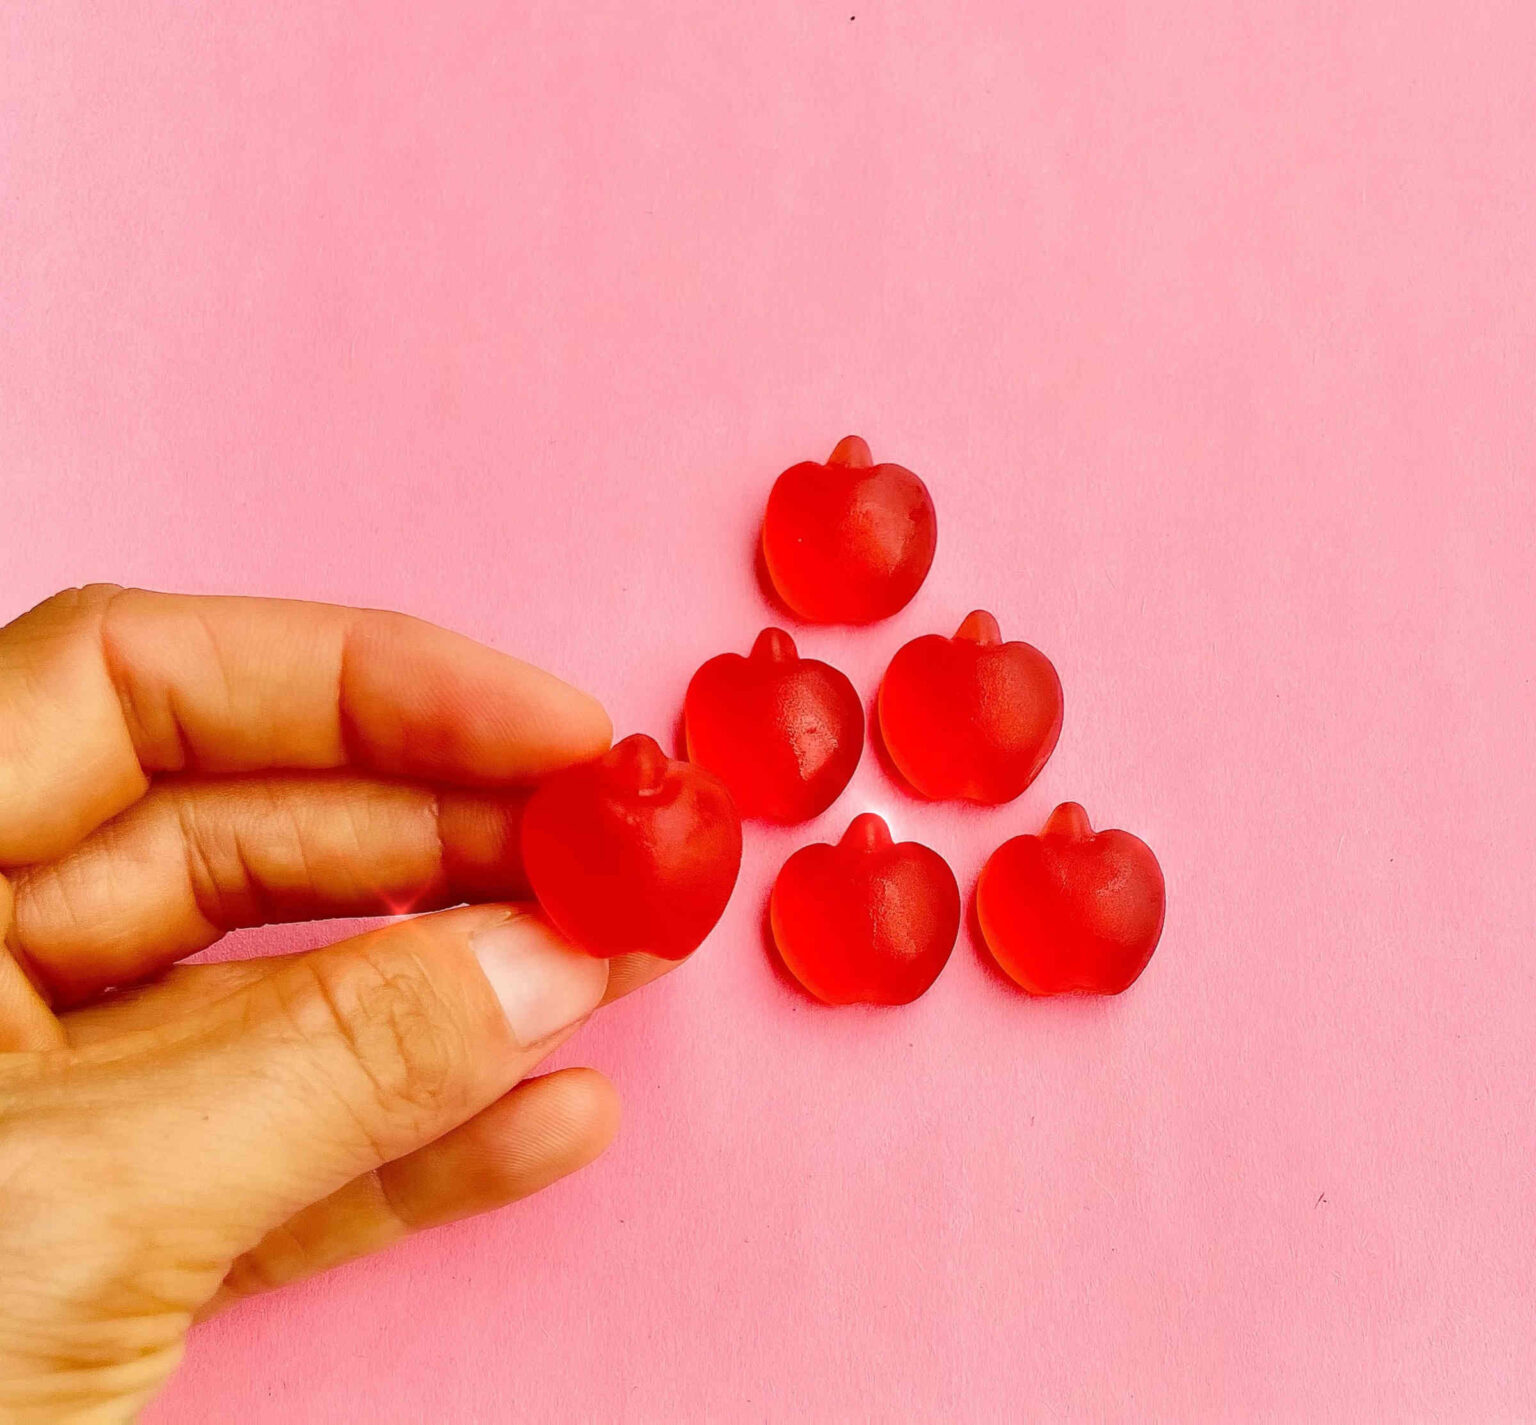 These ViaKeto Apple Gummies reviews speak highly of their benefits on the body. Is it a scam or does it actually work? Take notes as you find out!